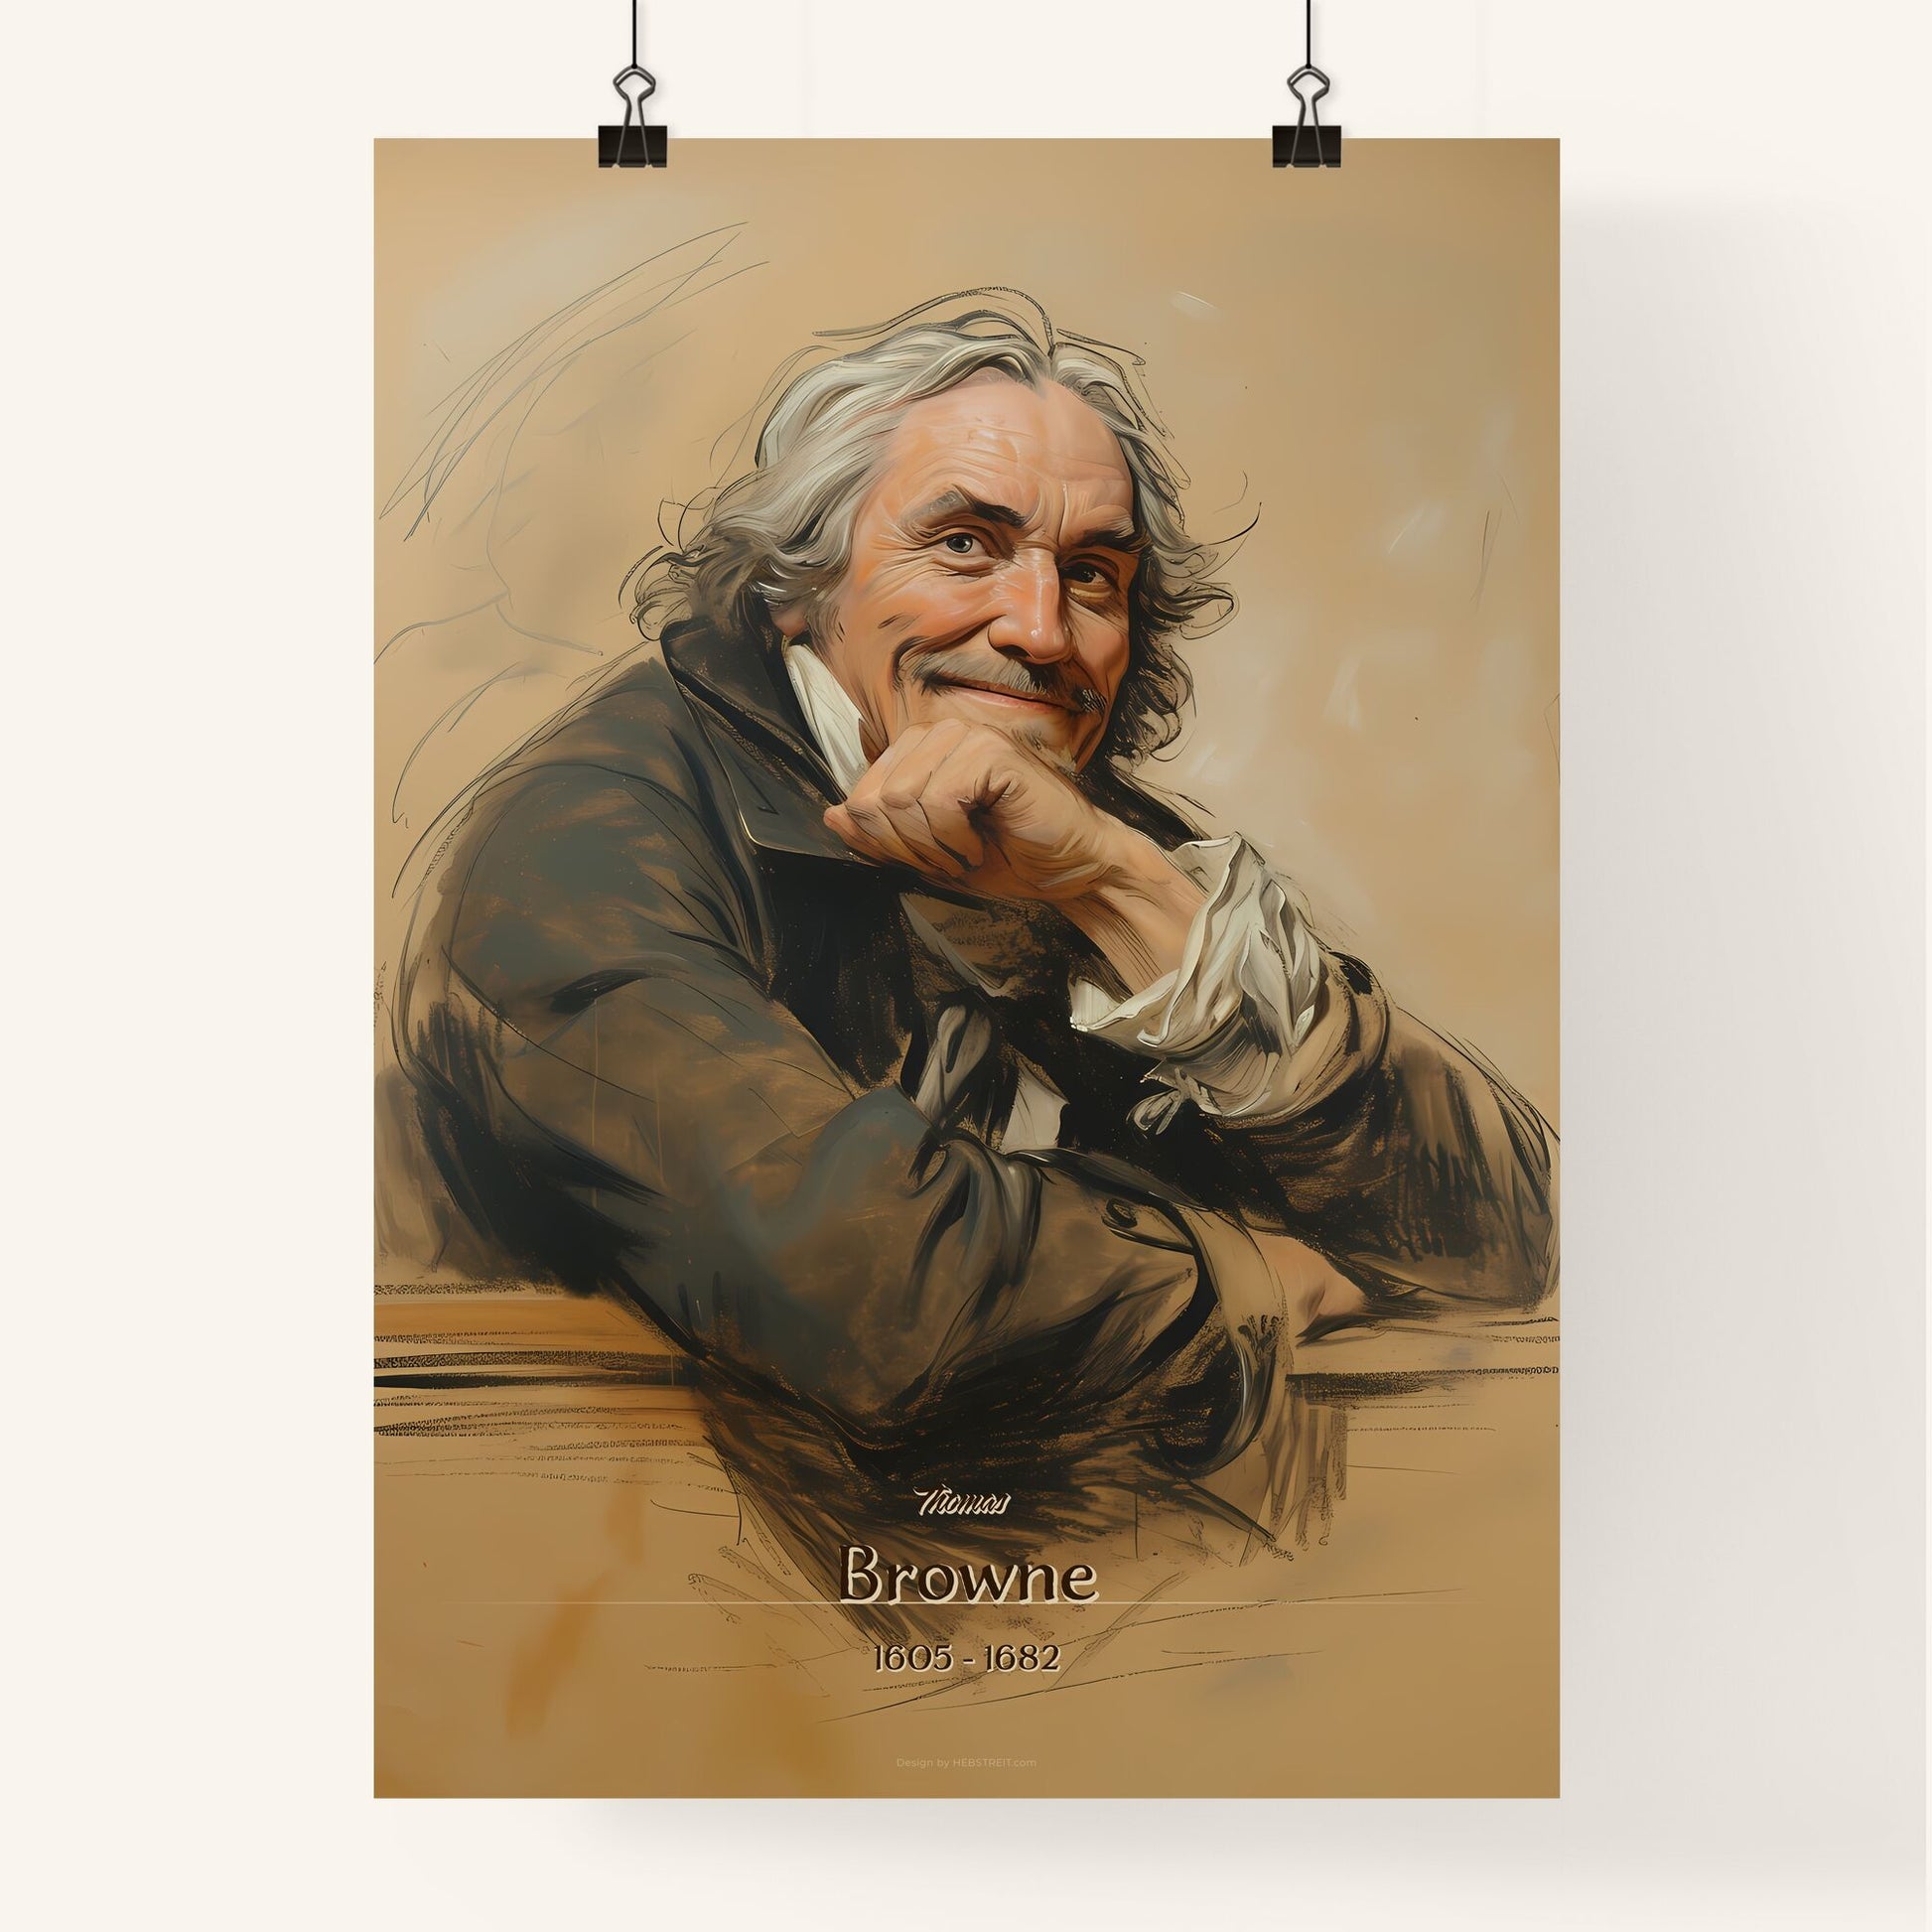 Thomas, Browne, 1605 - 1682, A Poster of a man with his hand on his chin Default Title